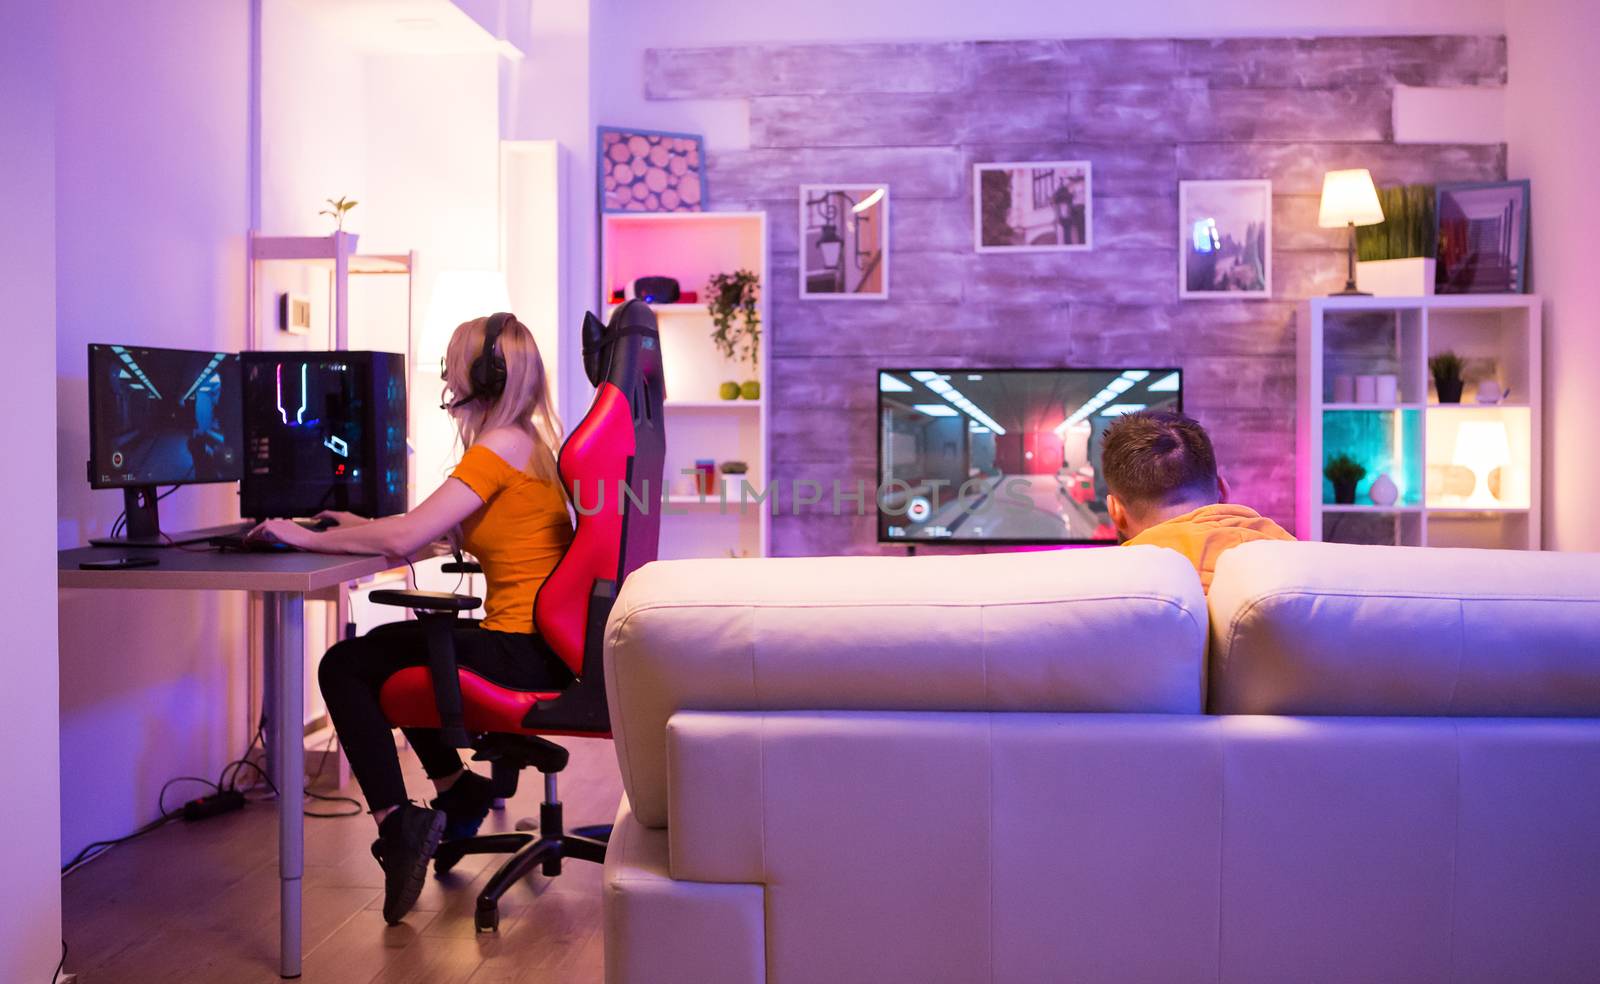 Back view of young man sitting on couch playing games. Girl sitting on gaming chair.